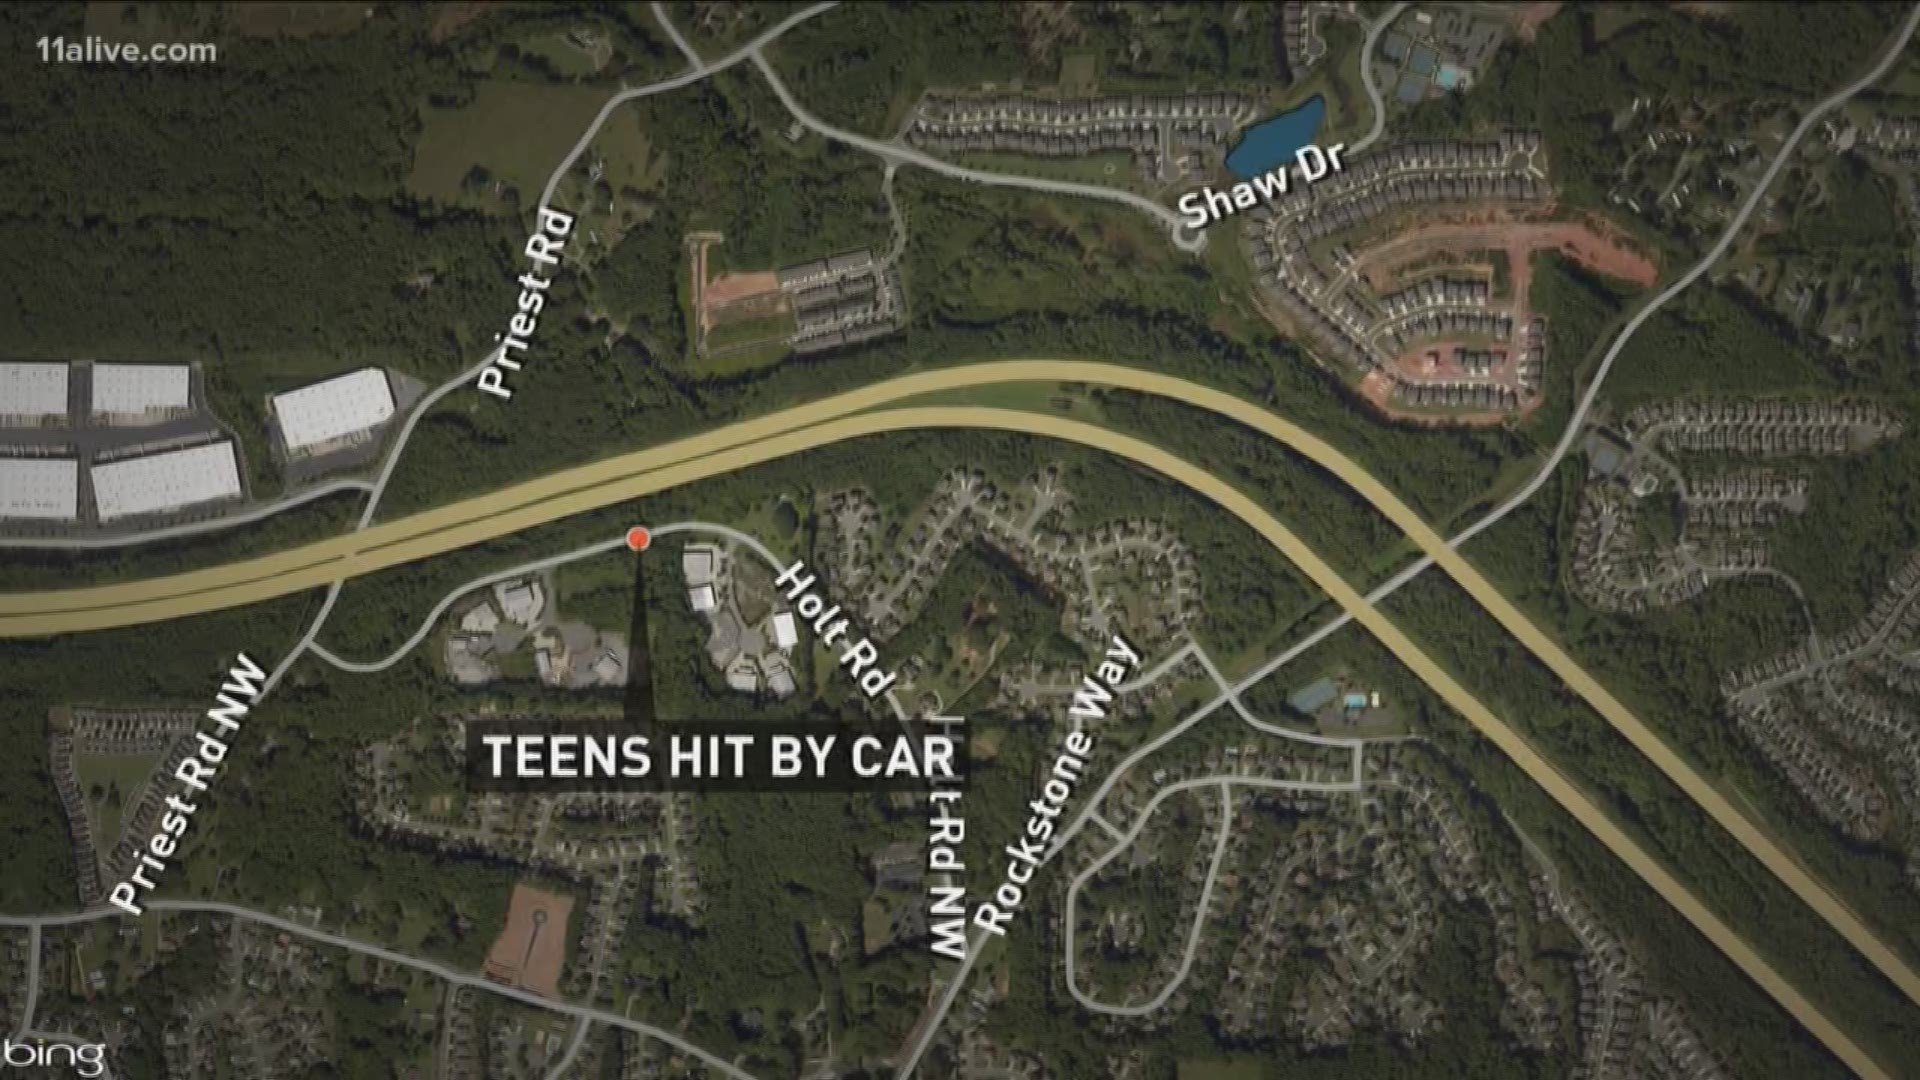 They were trying to cross Holt Road in Cobb County when they were both hit.